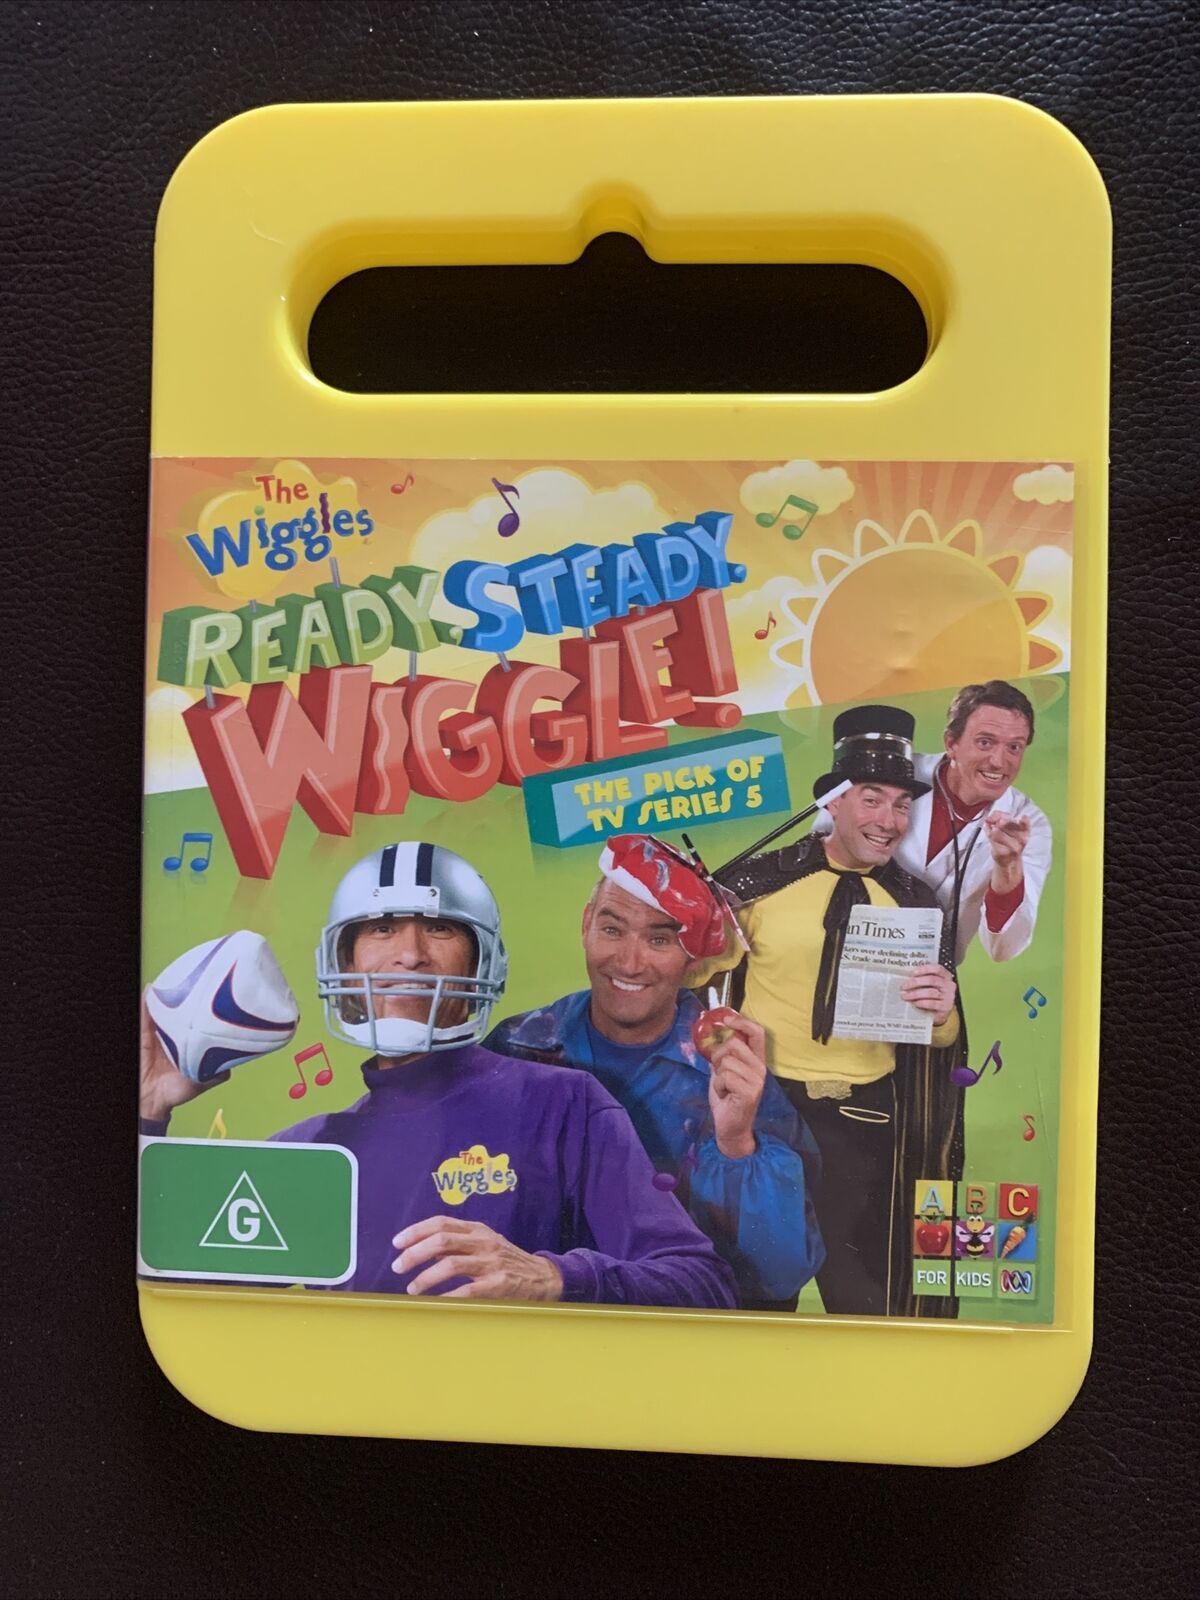 The Wiggles - Ready, Steady, Wiggle! : The Pick Of TV : Series 5 (DVD, 2010)